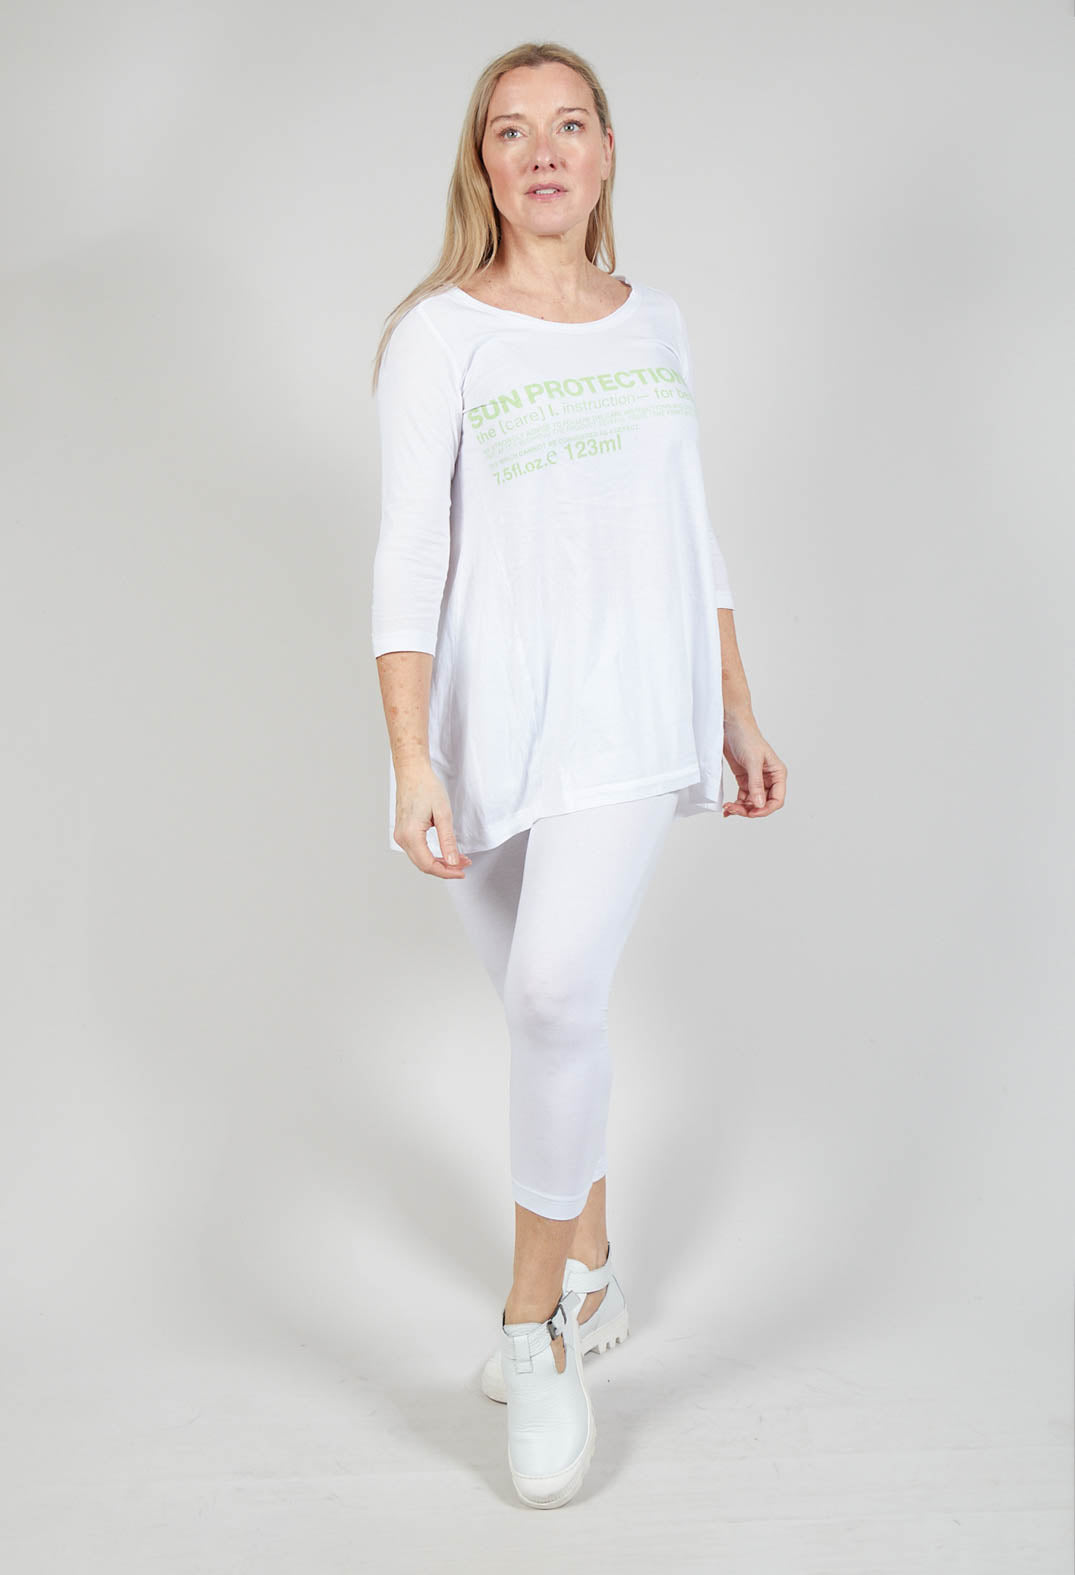 Flared Hem Jersey Top with Motif in Lime Print